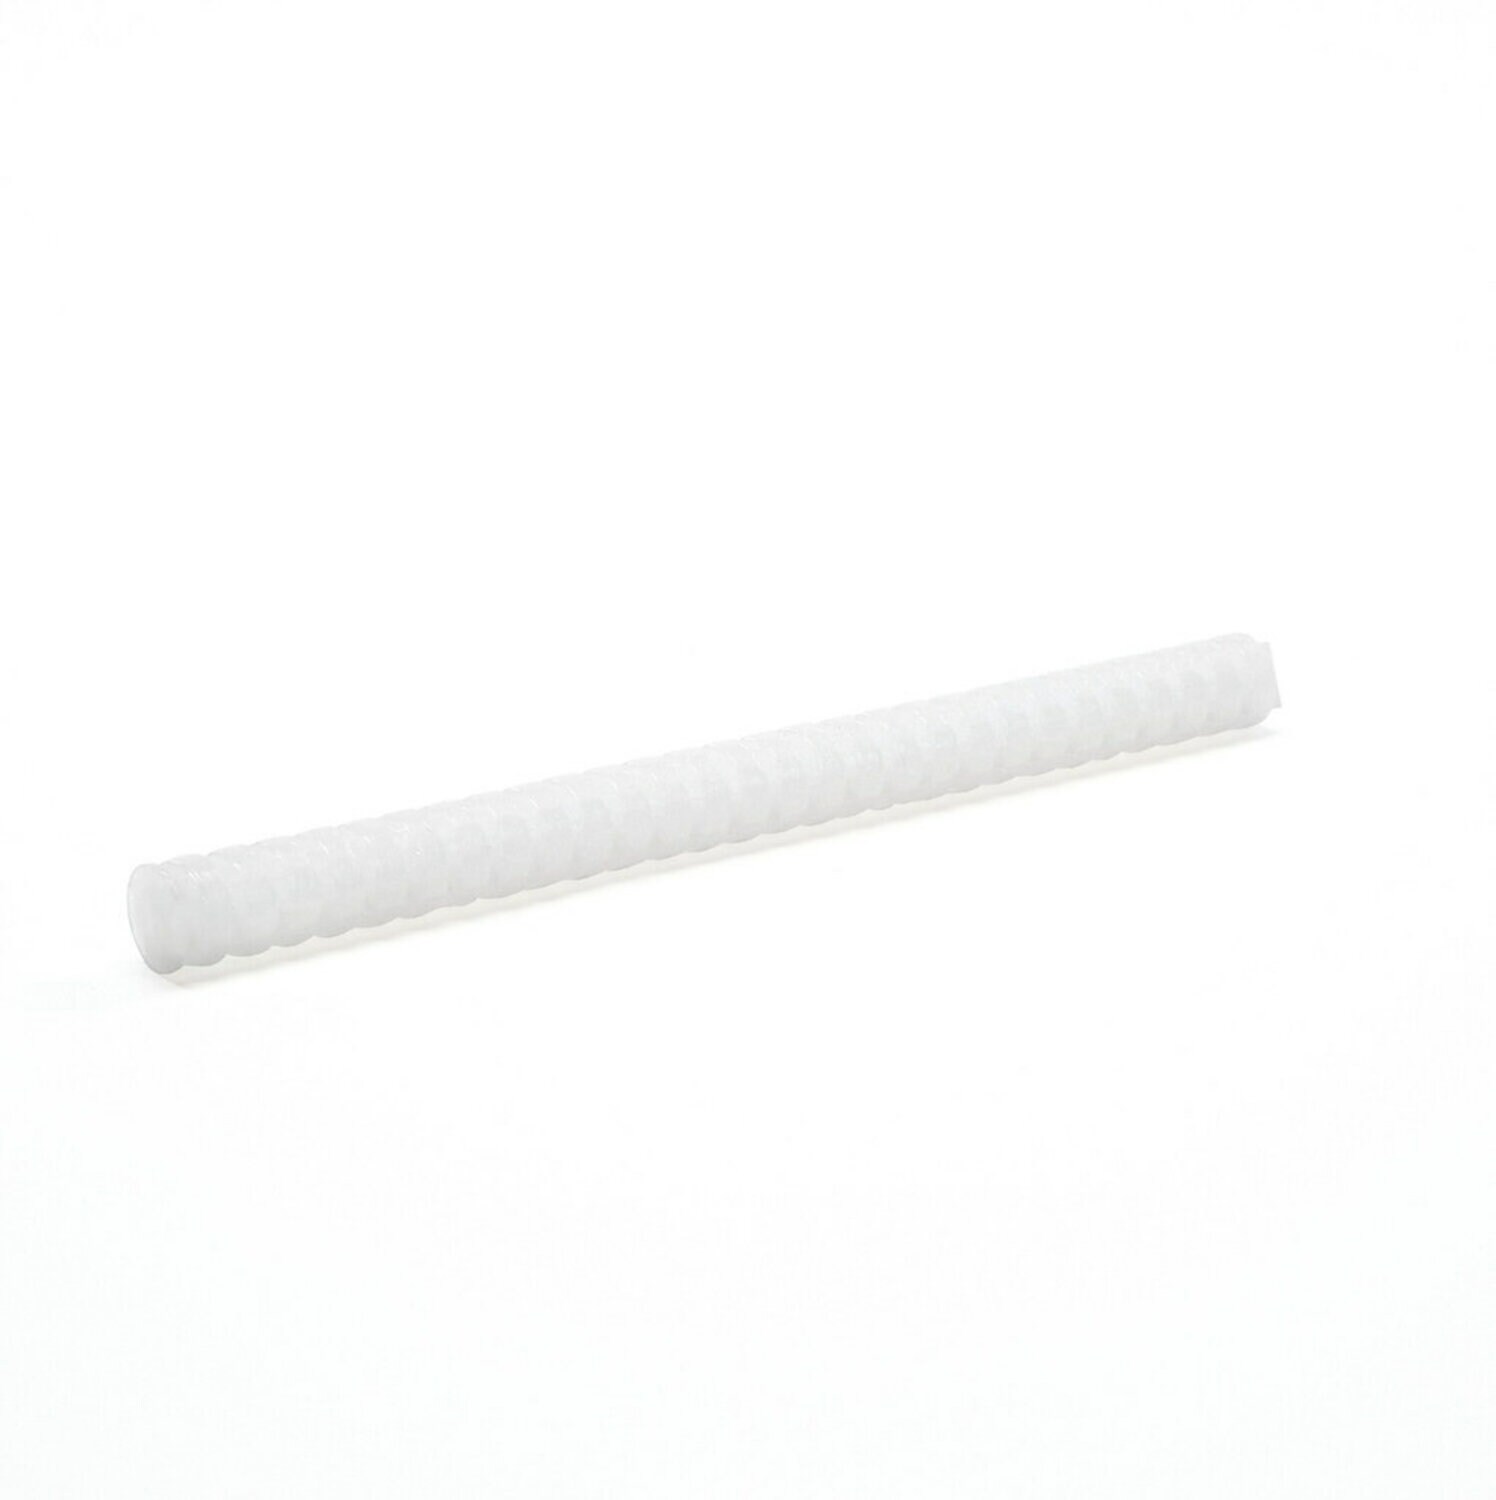 7000000880 - 3M Hot Melt Adhesive 3792LM Q, Clear, 5/8 in x 8 in, 11 lb, Case